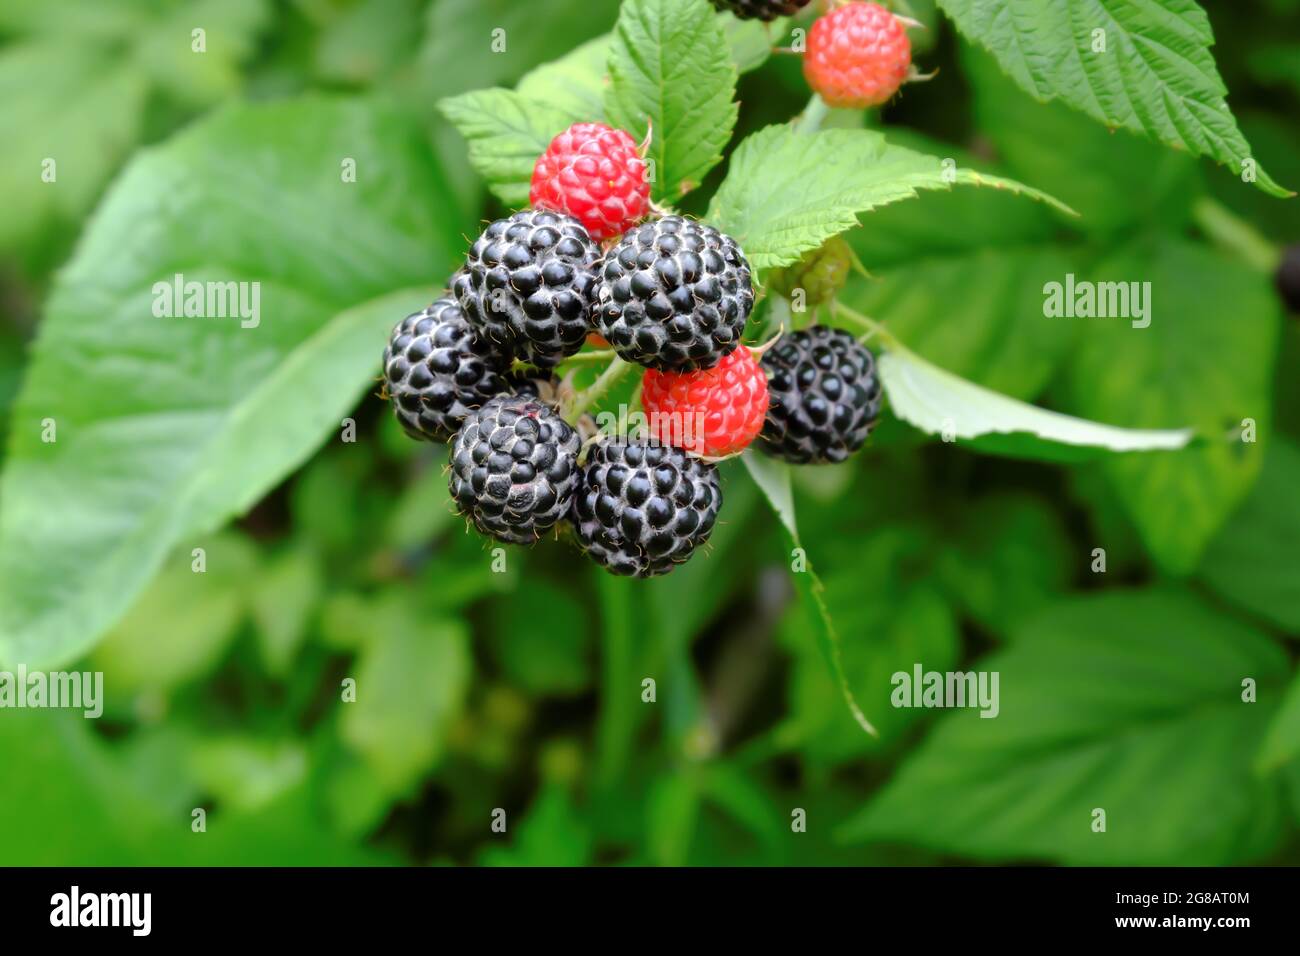 A blackberry bush with ripe, juicy black berries on a garden plot. Selective focus. Stock Photo